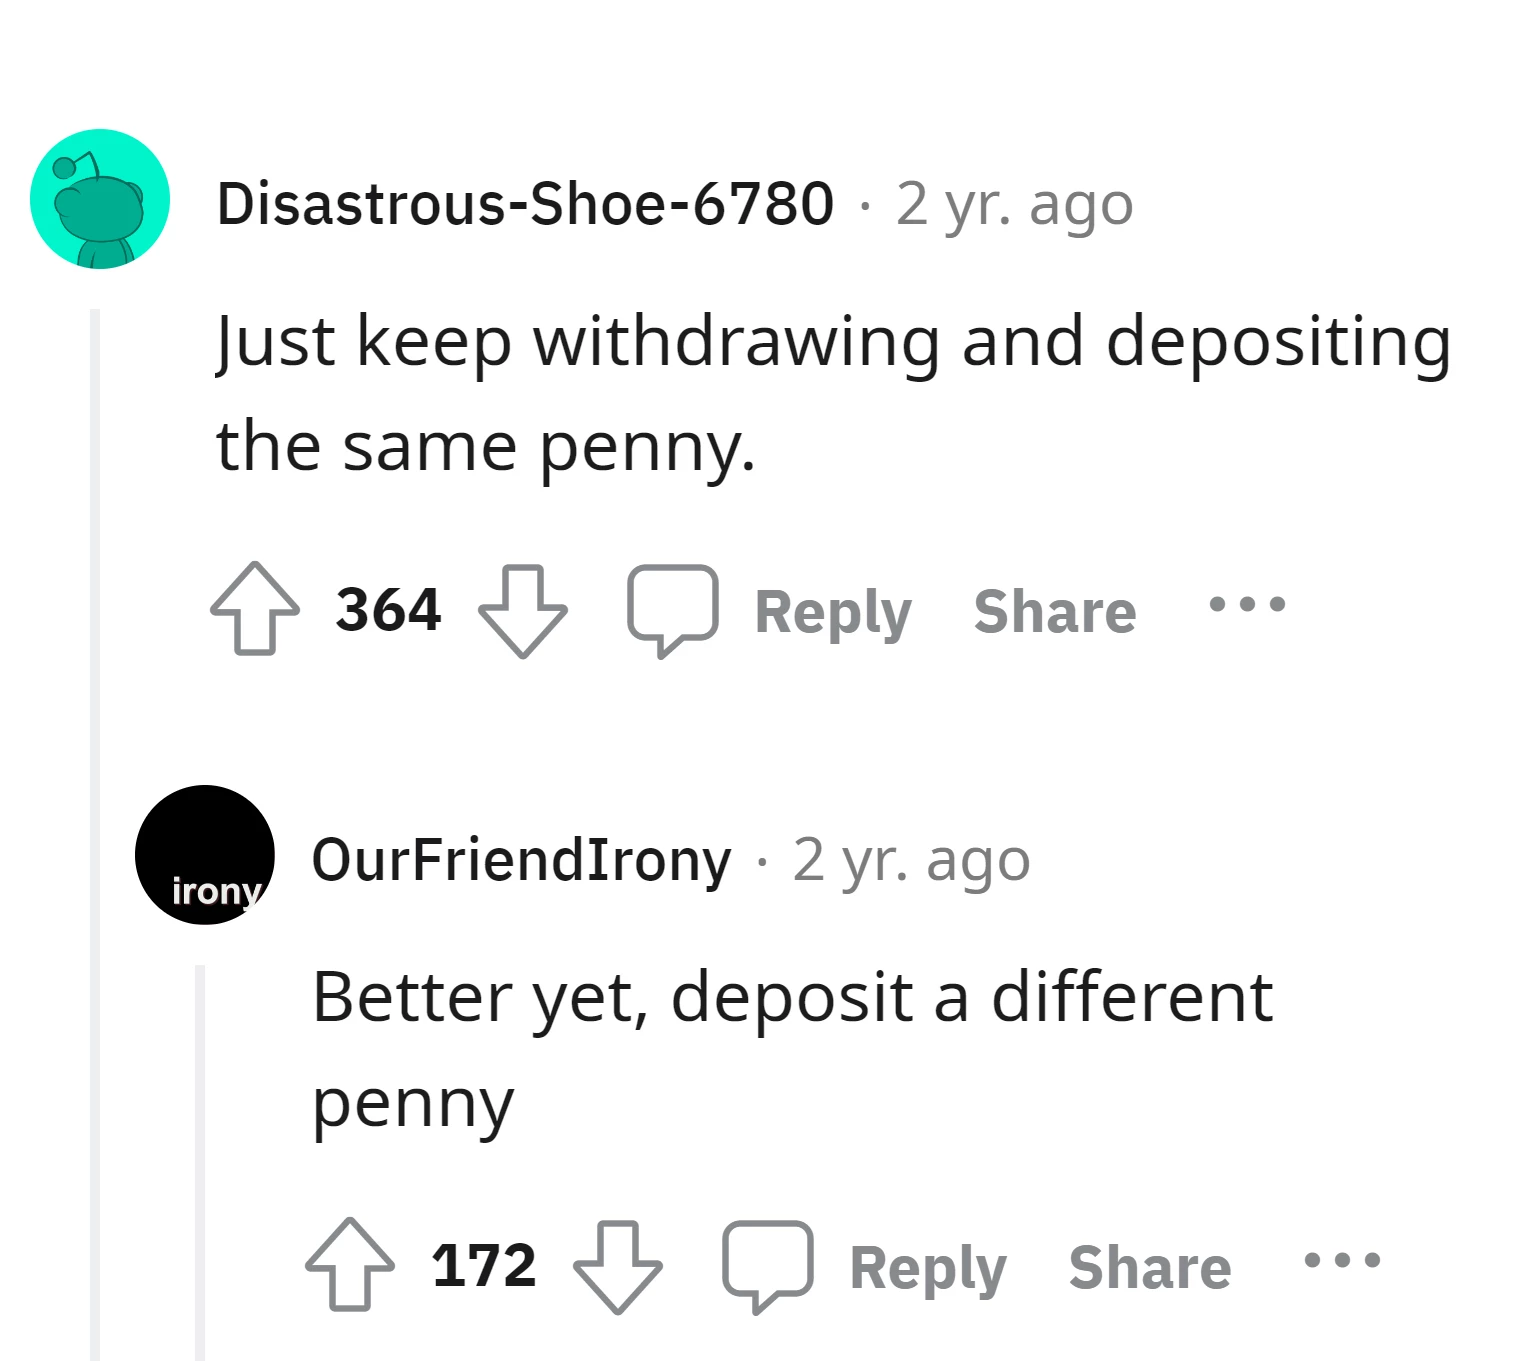 Commenter suggests a cheeky solution to avoid inactivity fees by continuously withdrawing and depositing the same penny,